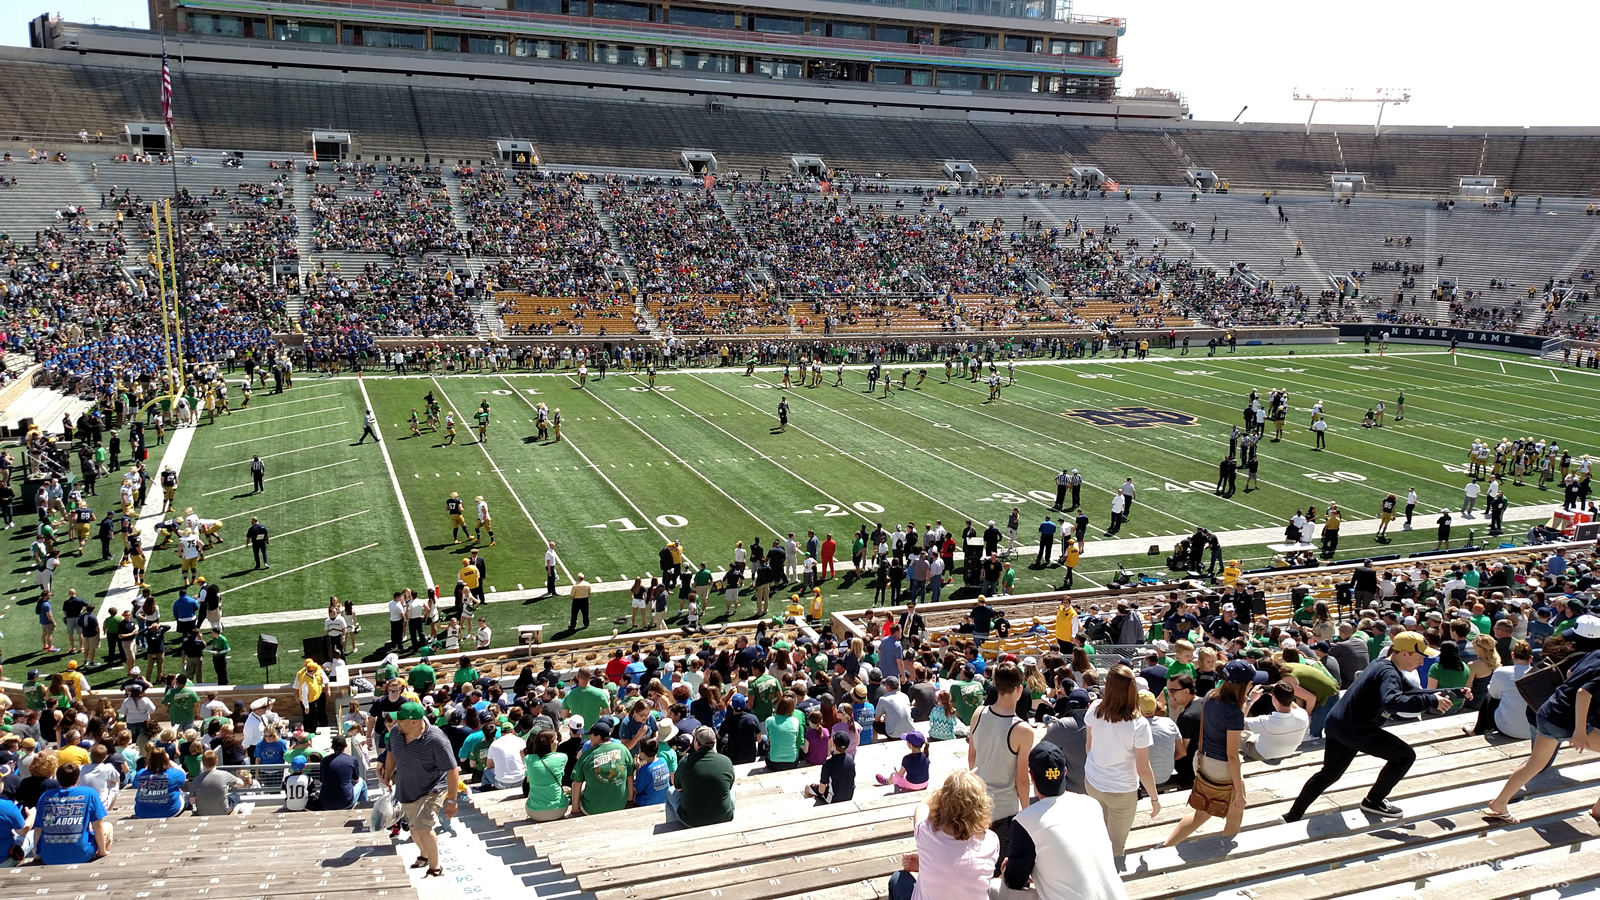 section 31, row 50 seat view  - notre dame stadium